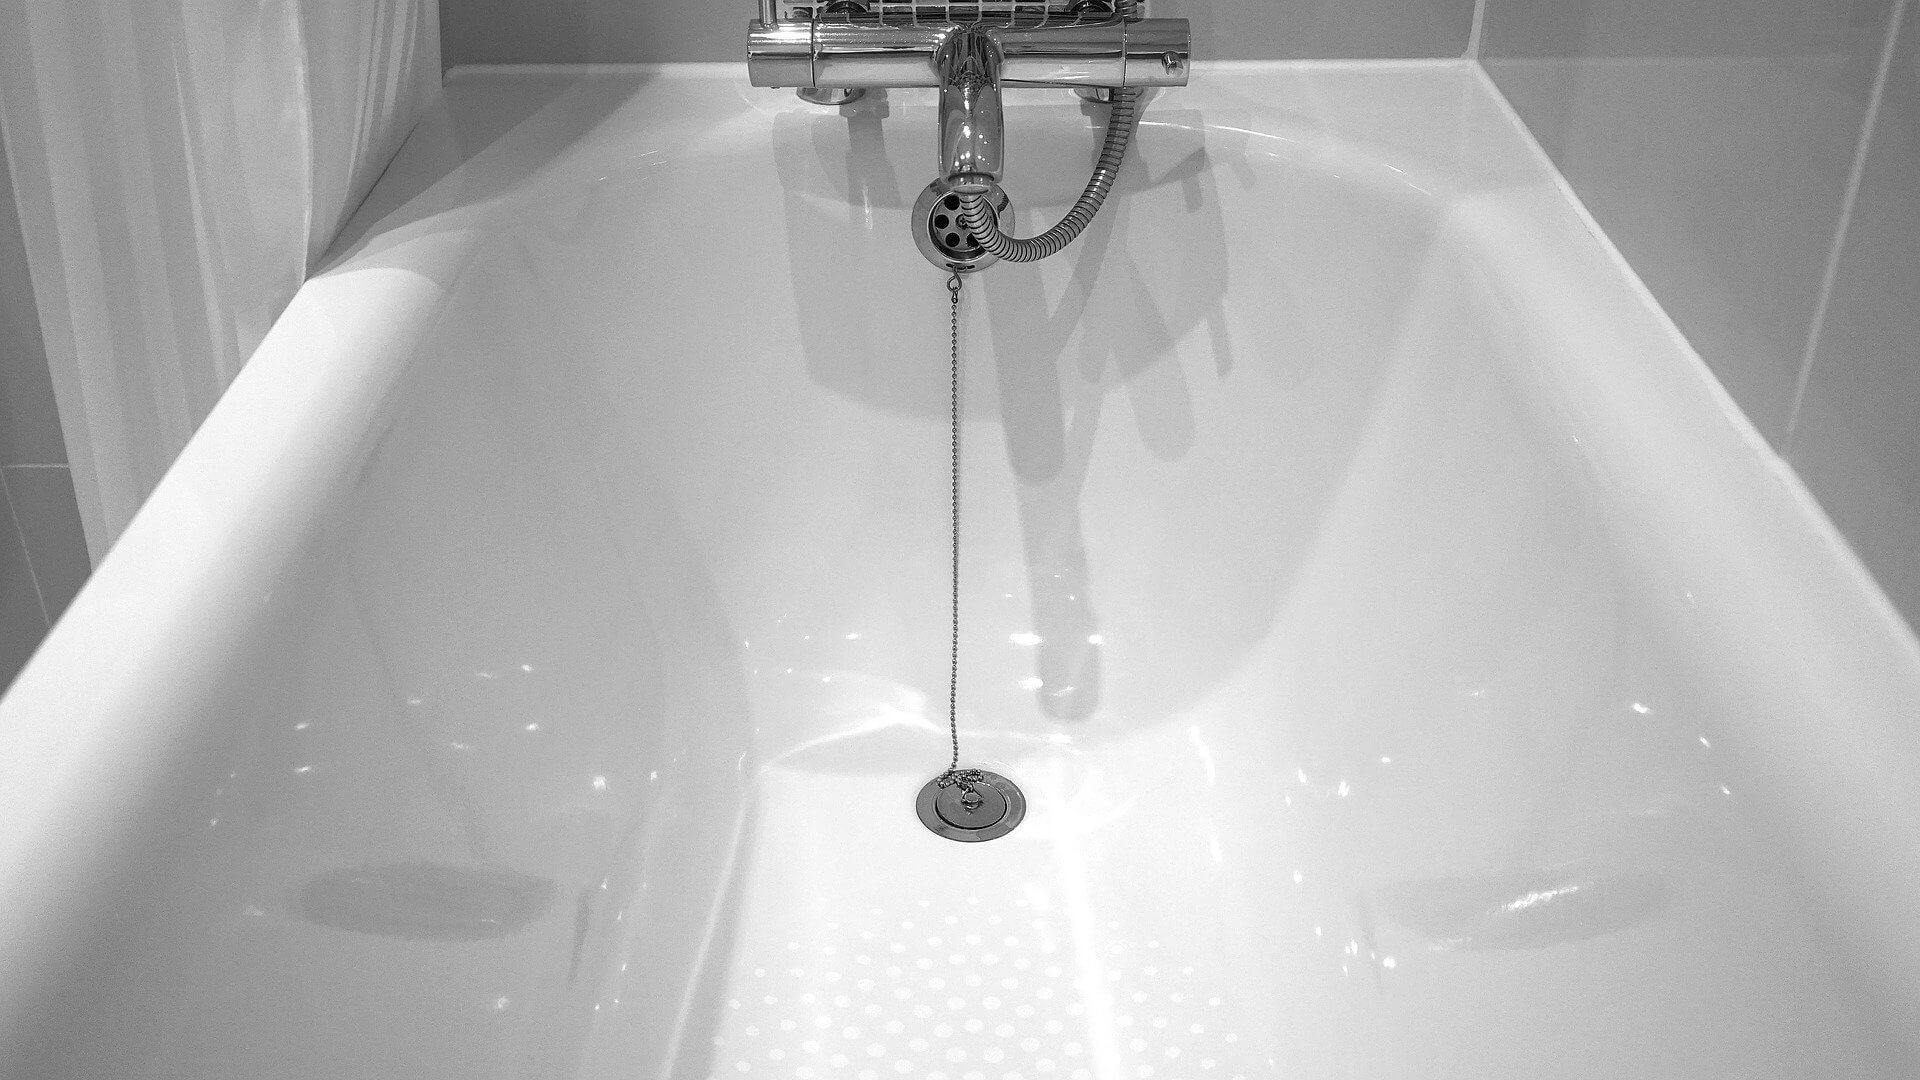 Tub-to-Shower Conversion With The Bath Planet System